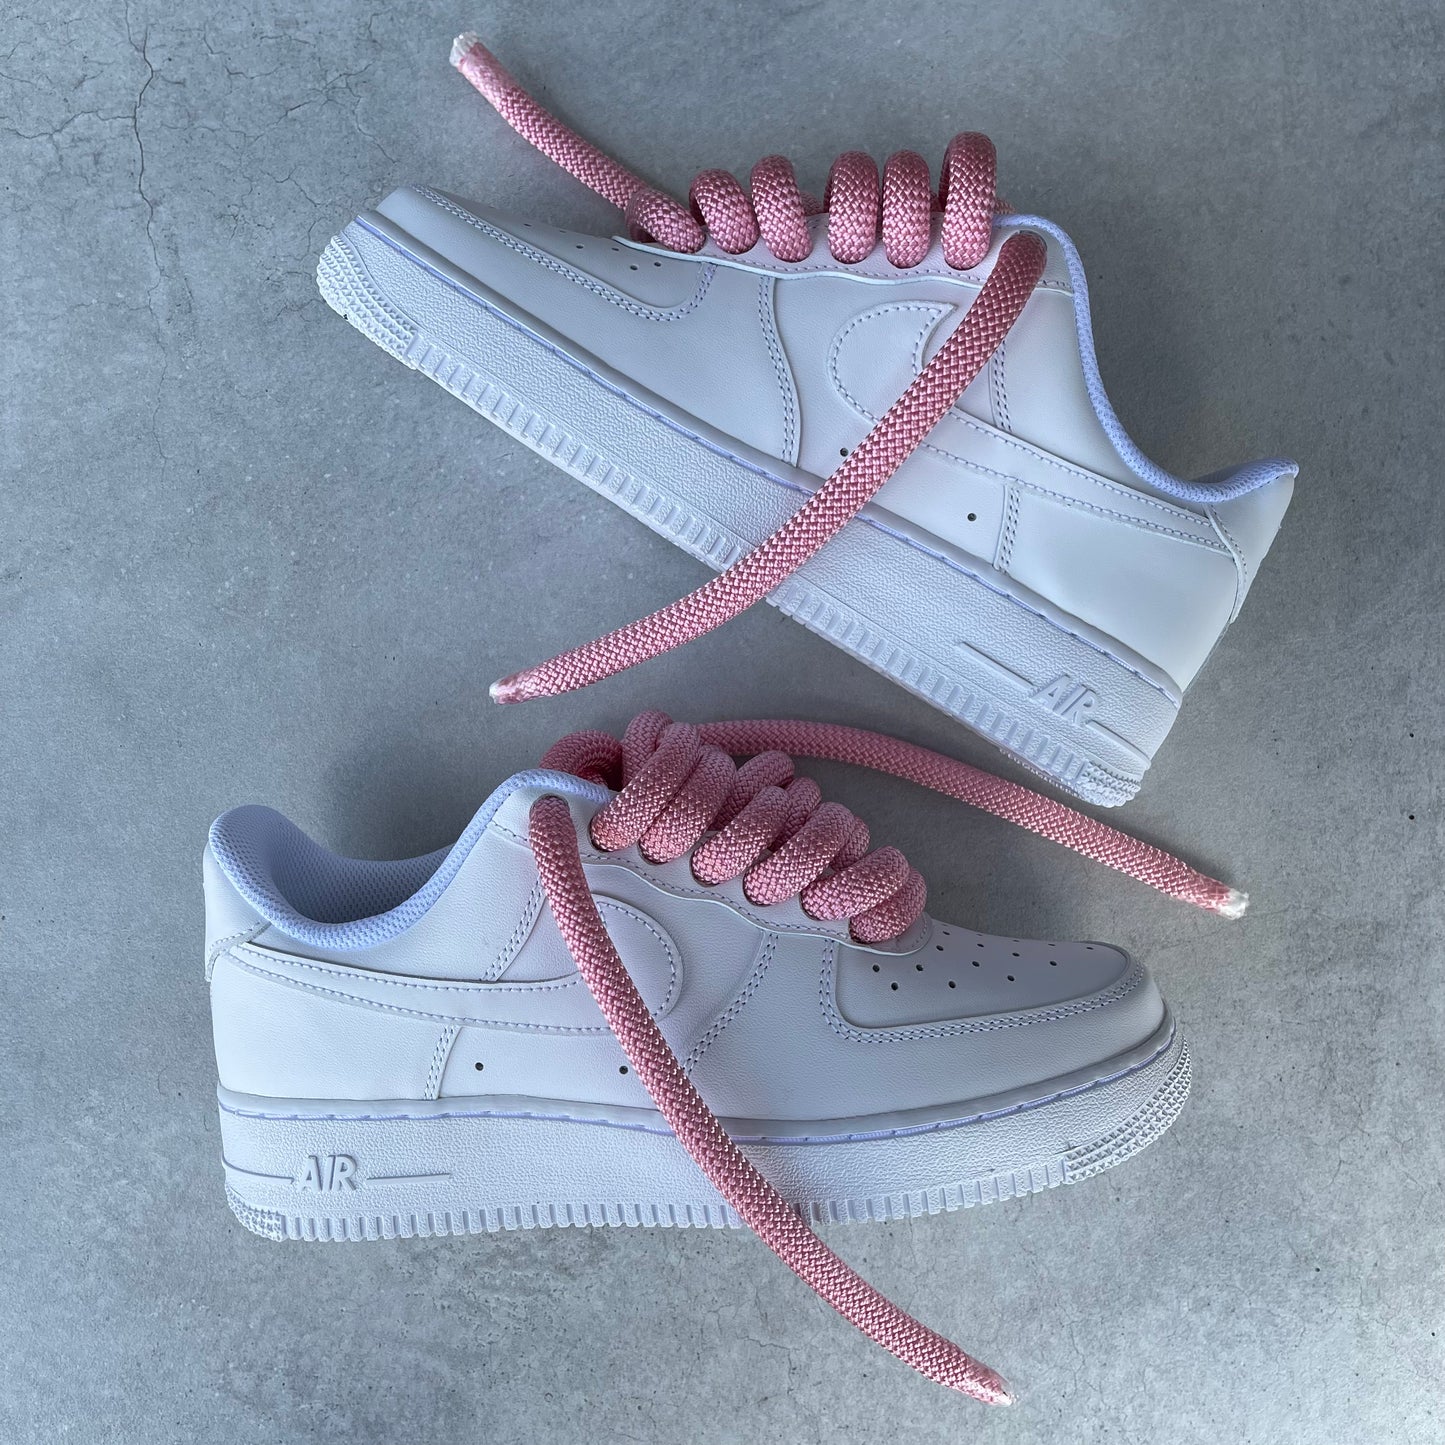 Custom AIR FORCE 1 - Rope laces 2.0 (pink)